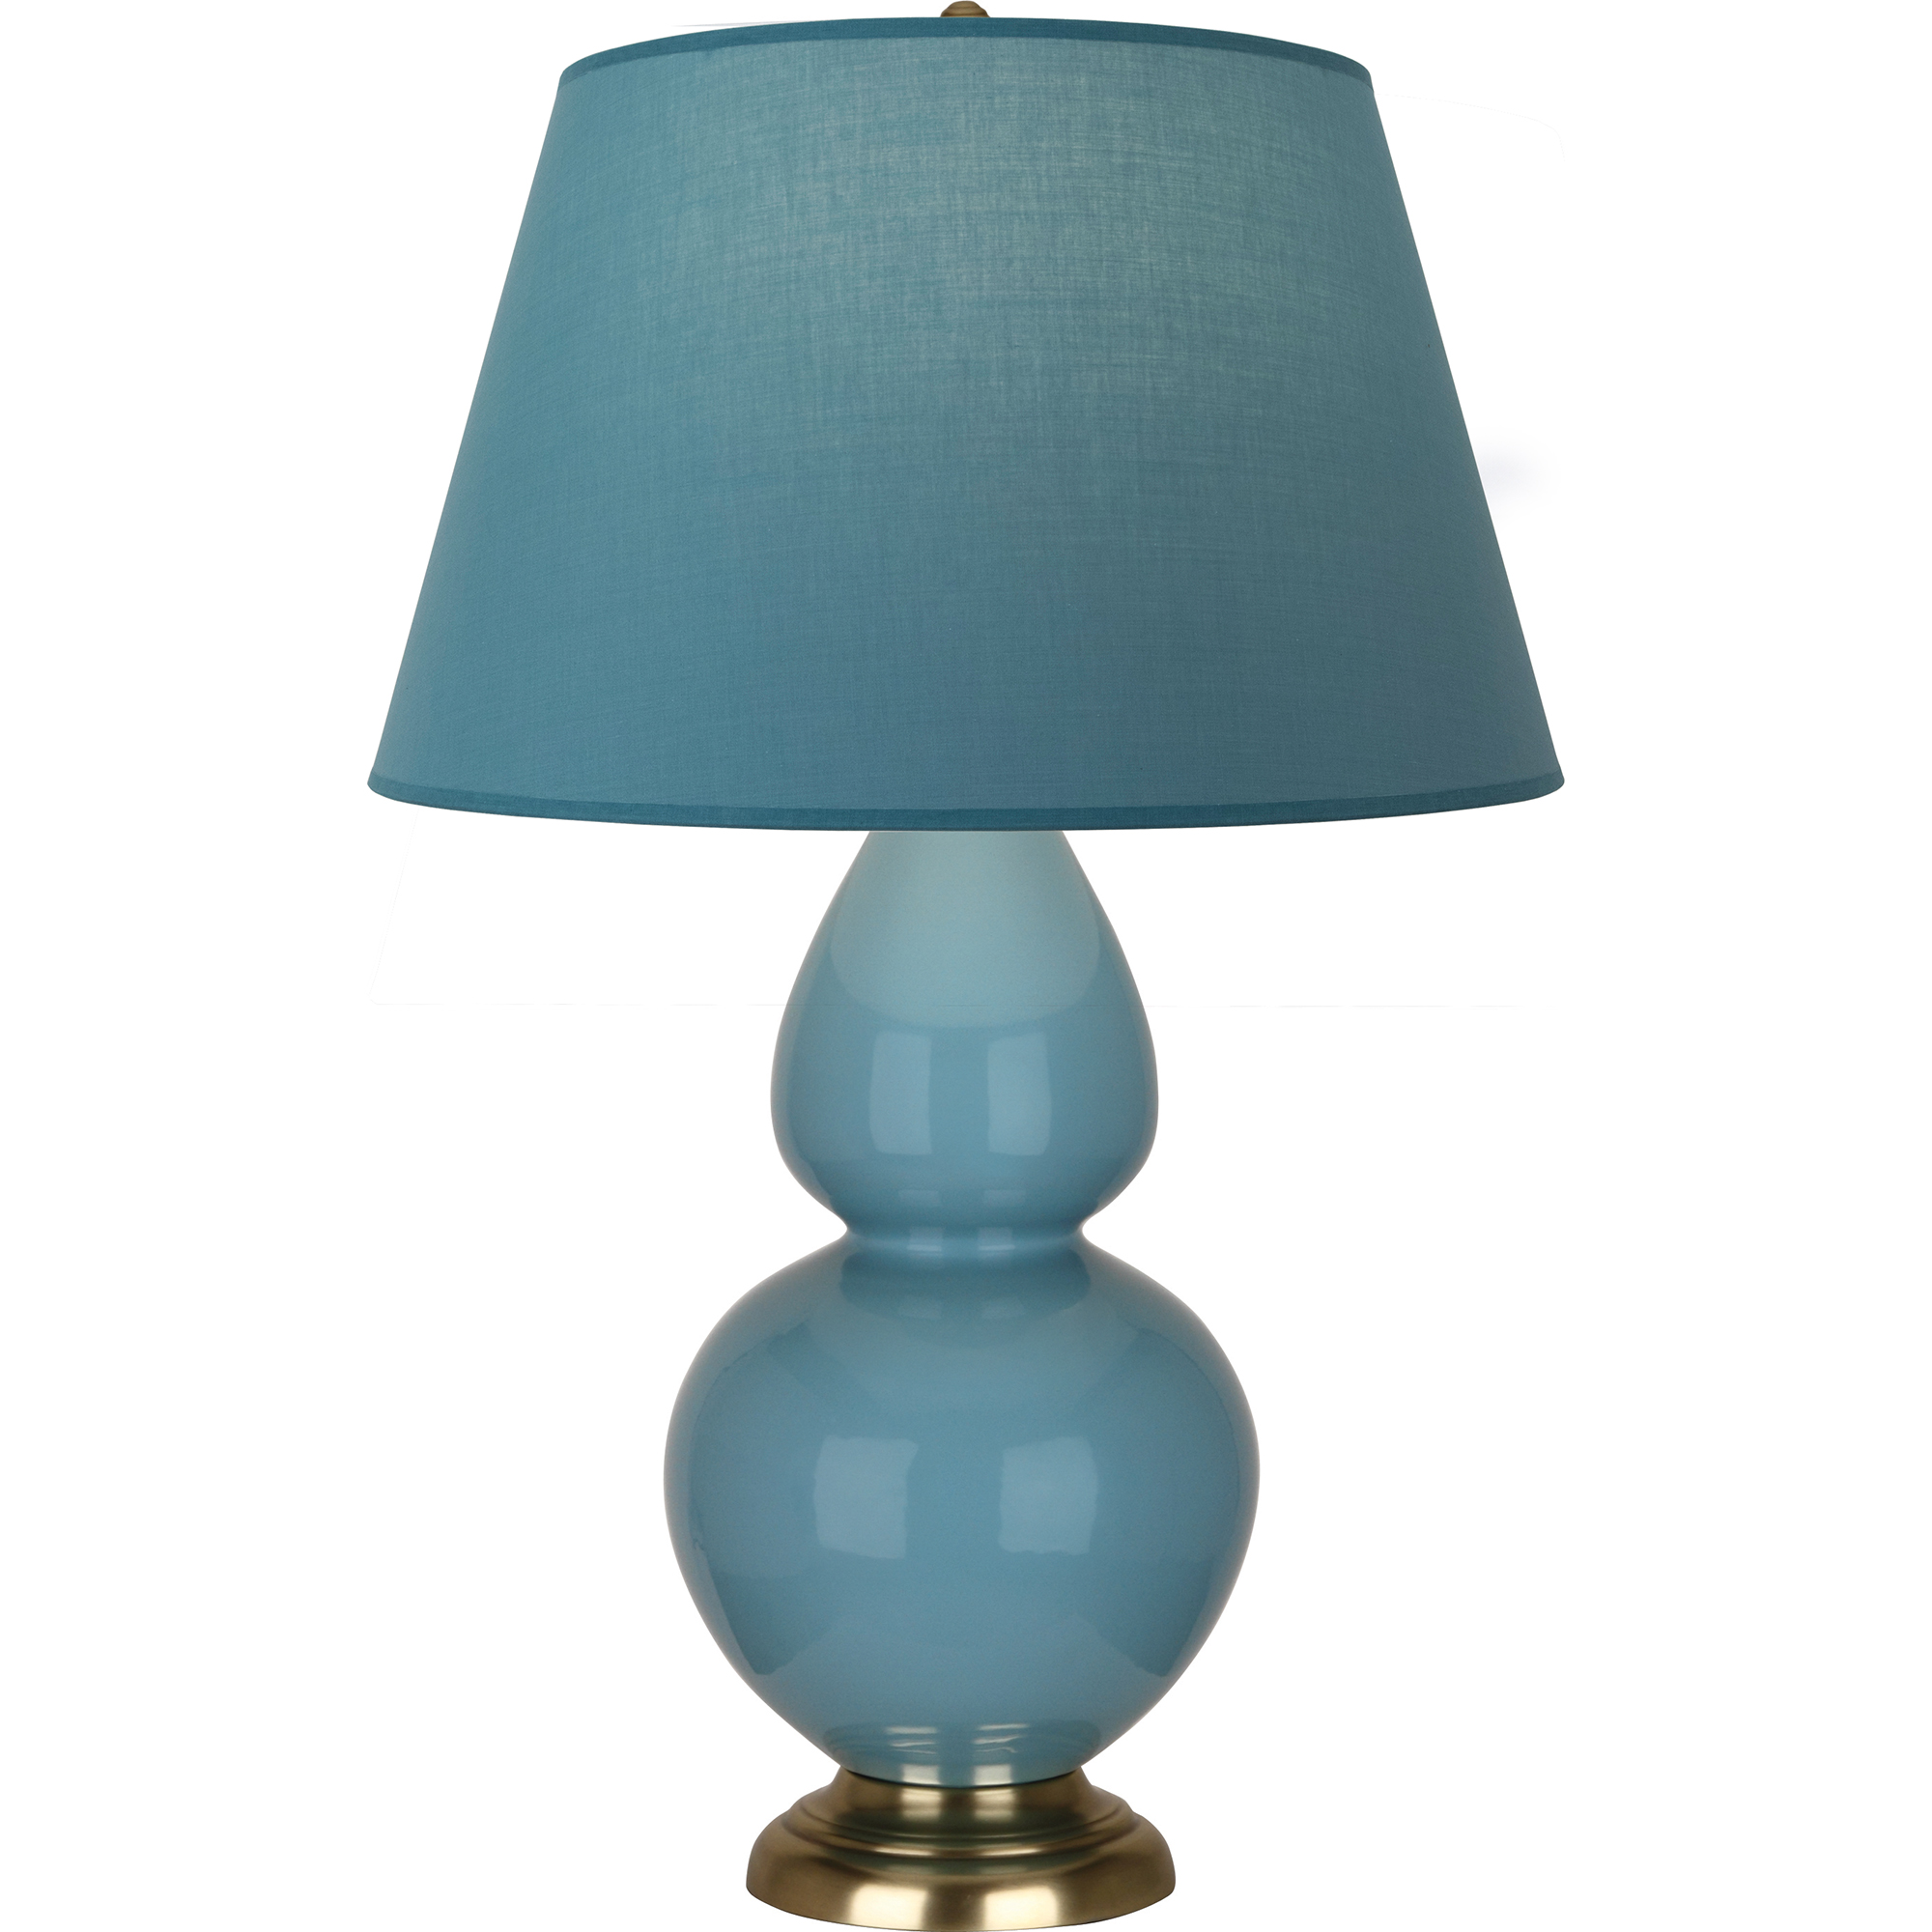 Double Gourd Table Lamp Style #OB20B